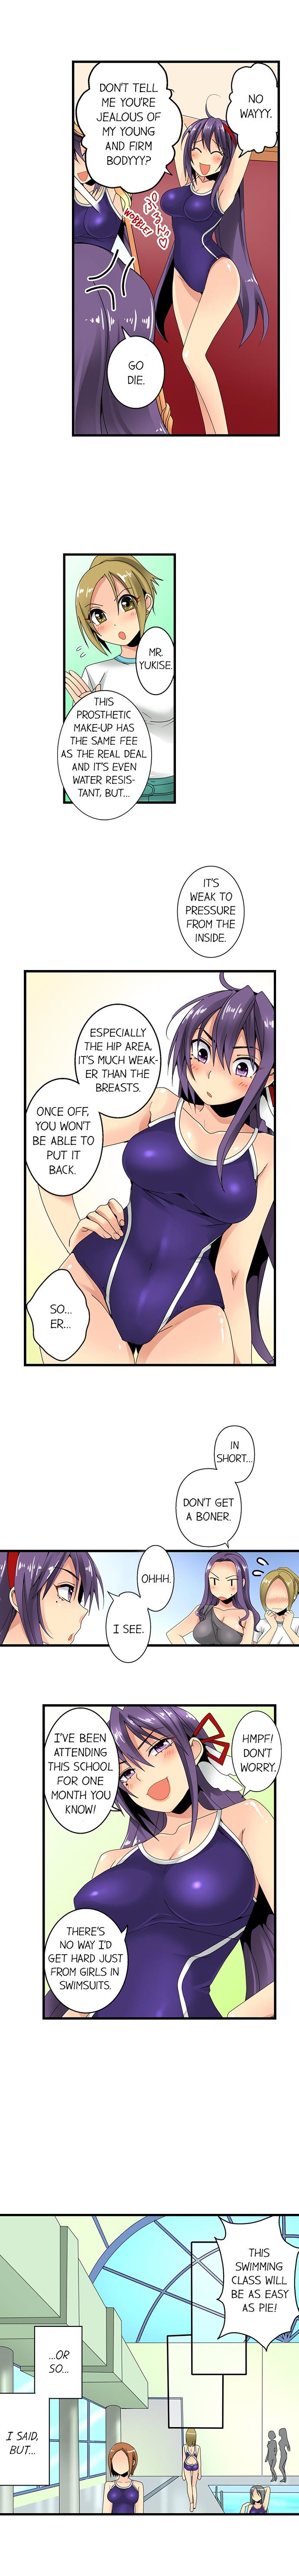 Sneaked Into A Horny Girls’ School - Chapter 13 Page 3